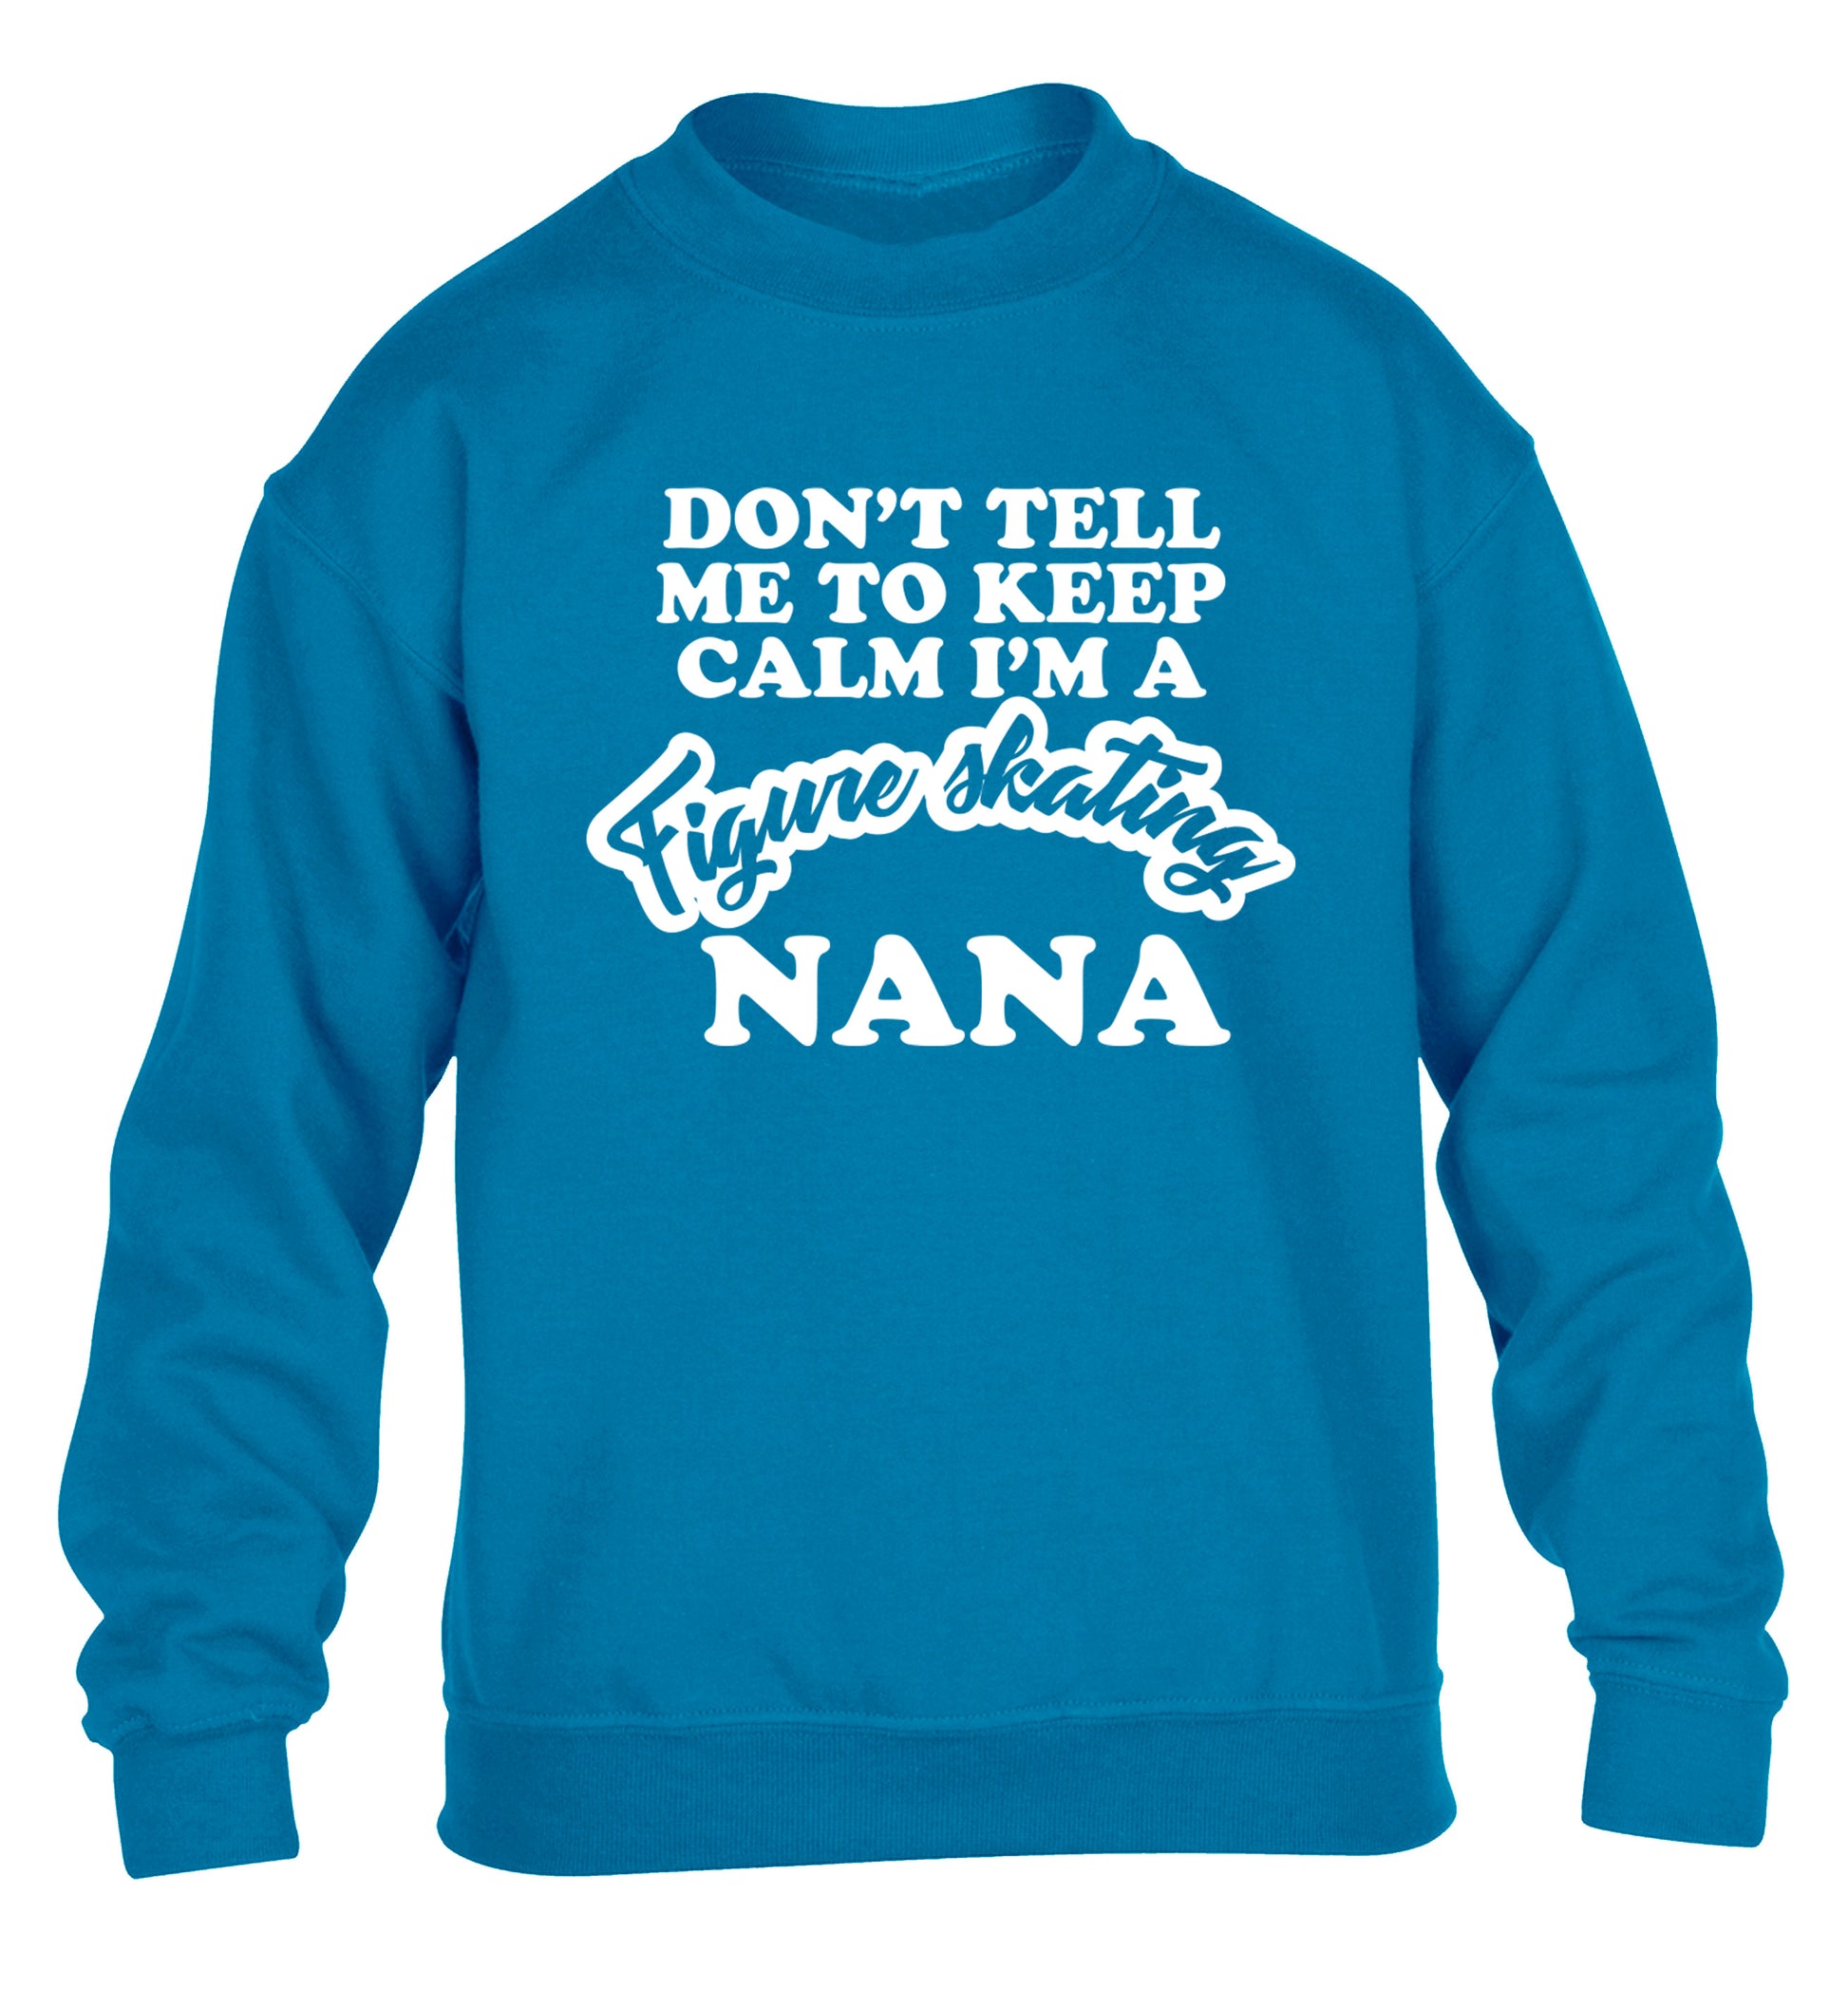 Don't tell me to keep calm I'm a figure skating nana children's blue sweater 12-14 Years